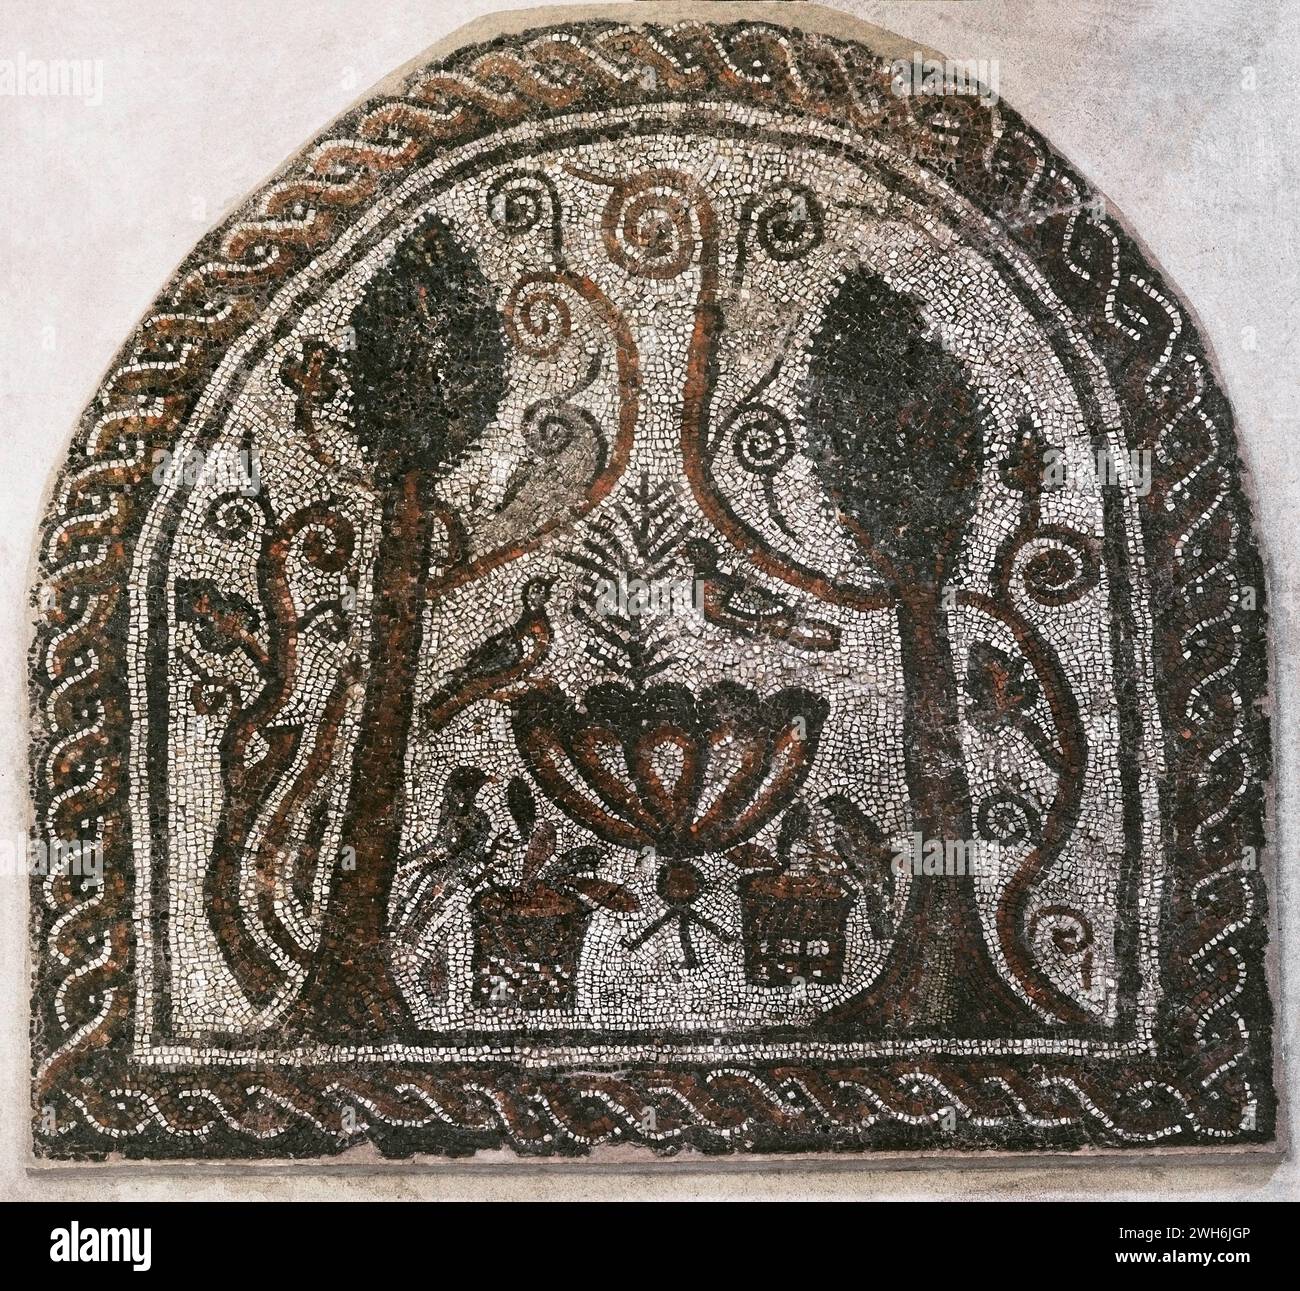 Floor mosaic from the Basilica of  St. Sophia in Sofia, Bulgaria. It was located in the apse of the first ecclesiastical building on the site of the basilica. First quarter of the 4th century AD. Symbolic depiction of the Christian Paradise. Two cypresses on both sides, intertwined with vine branches (rinceaux). The doves represent the souls of believers. Made of stone and coloured glass tesserae using the opus vermiculatum and opus tesselatum techniques. 2,70 x 2,60 m. National Archaeological Museum. Sofia. Bulgaria. Stock Photo